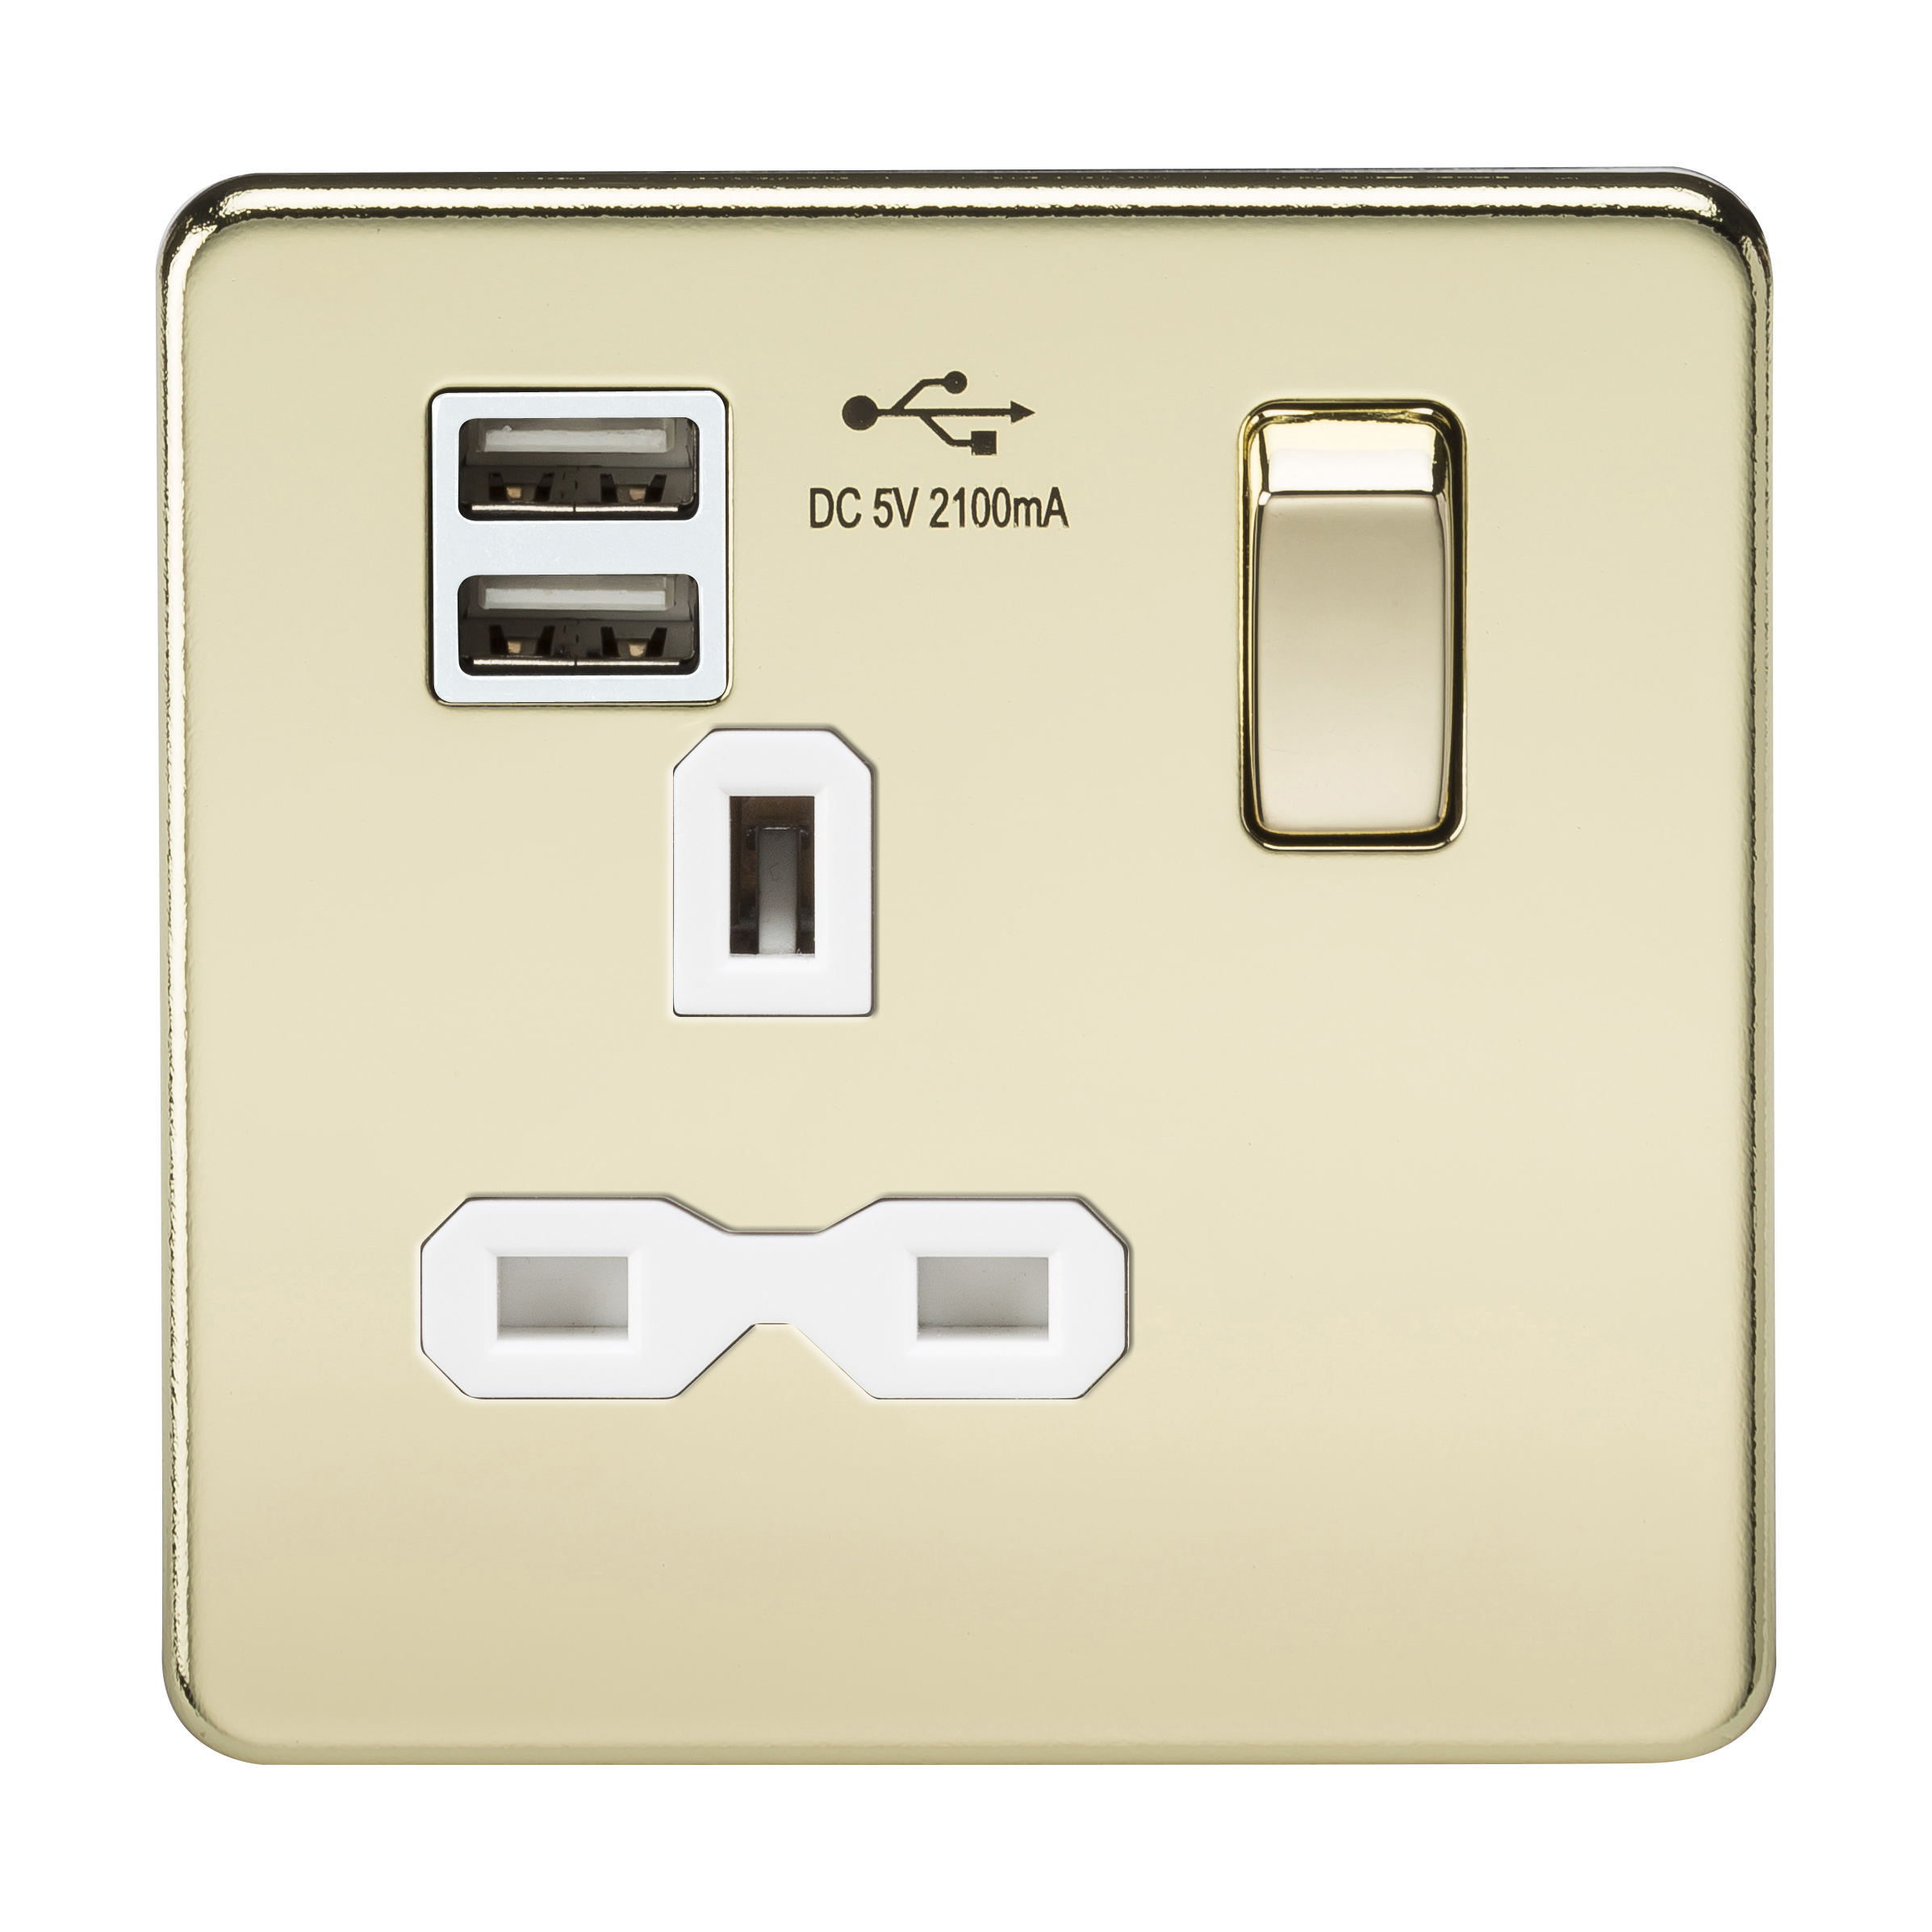 Screwless 13A 1G Switched Socket With Dual USB Charger (2.1A) - Polished Brass With White Insert - SFR9901PBW 